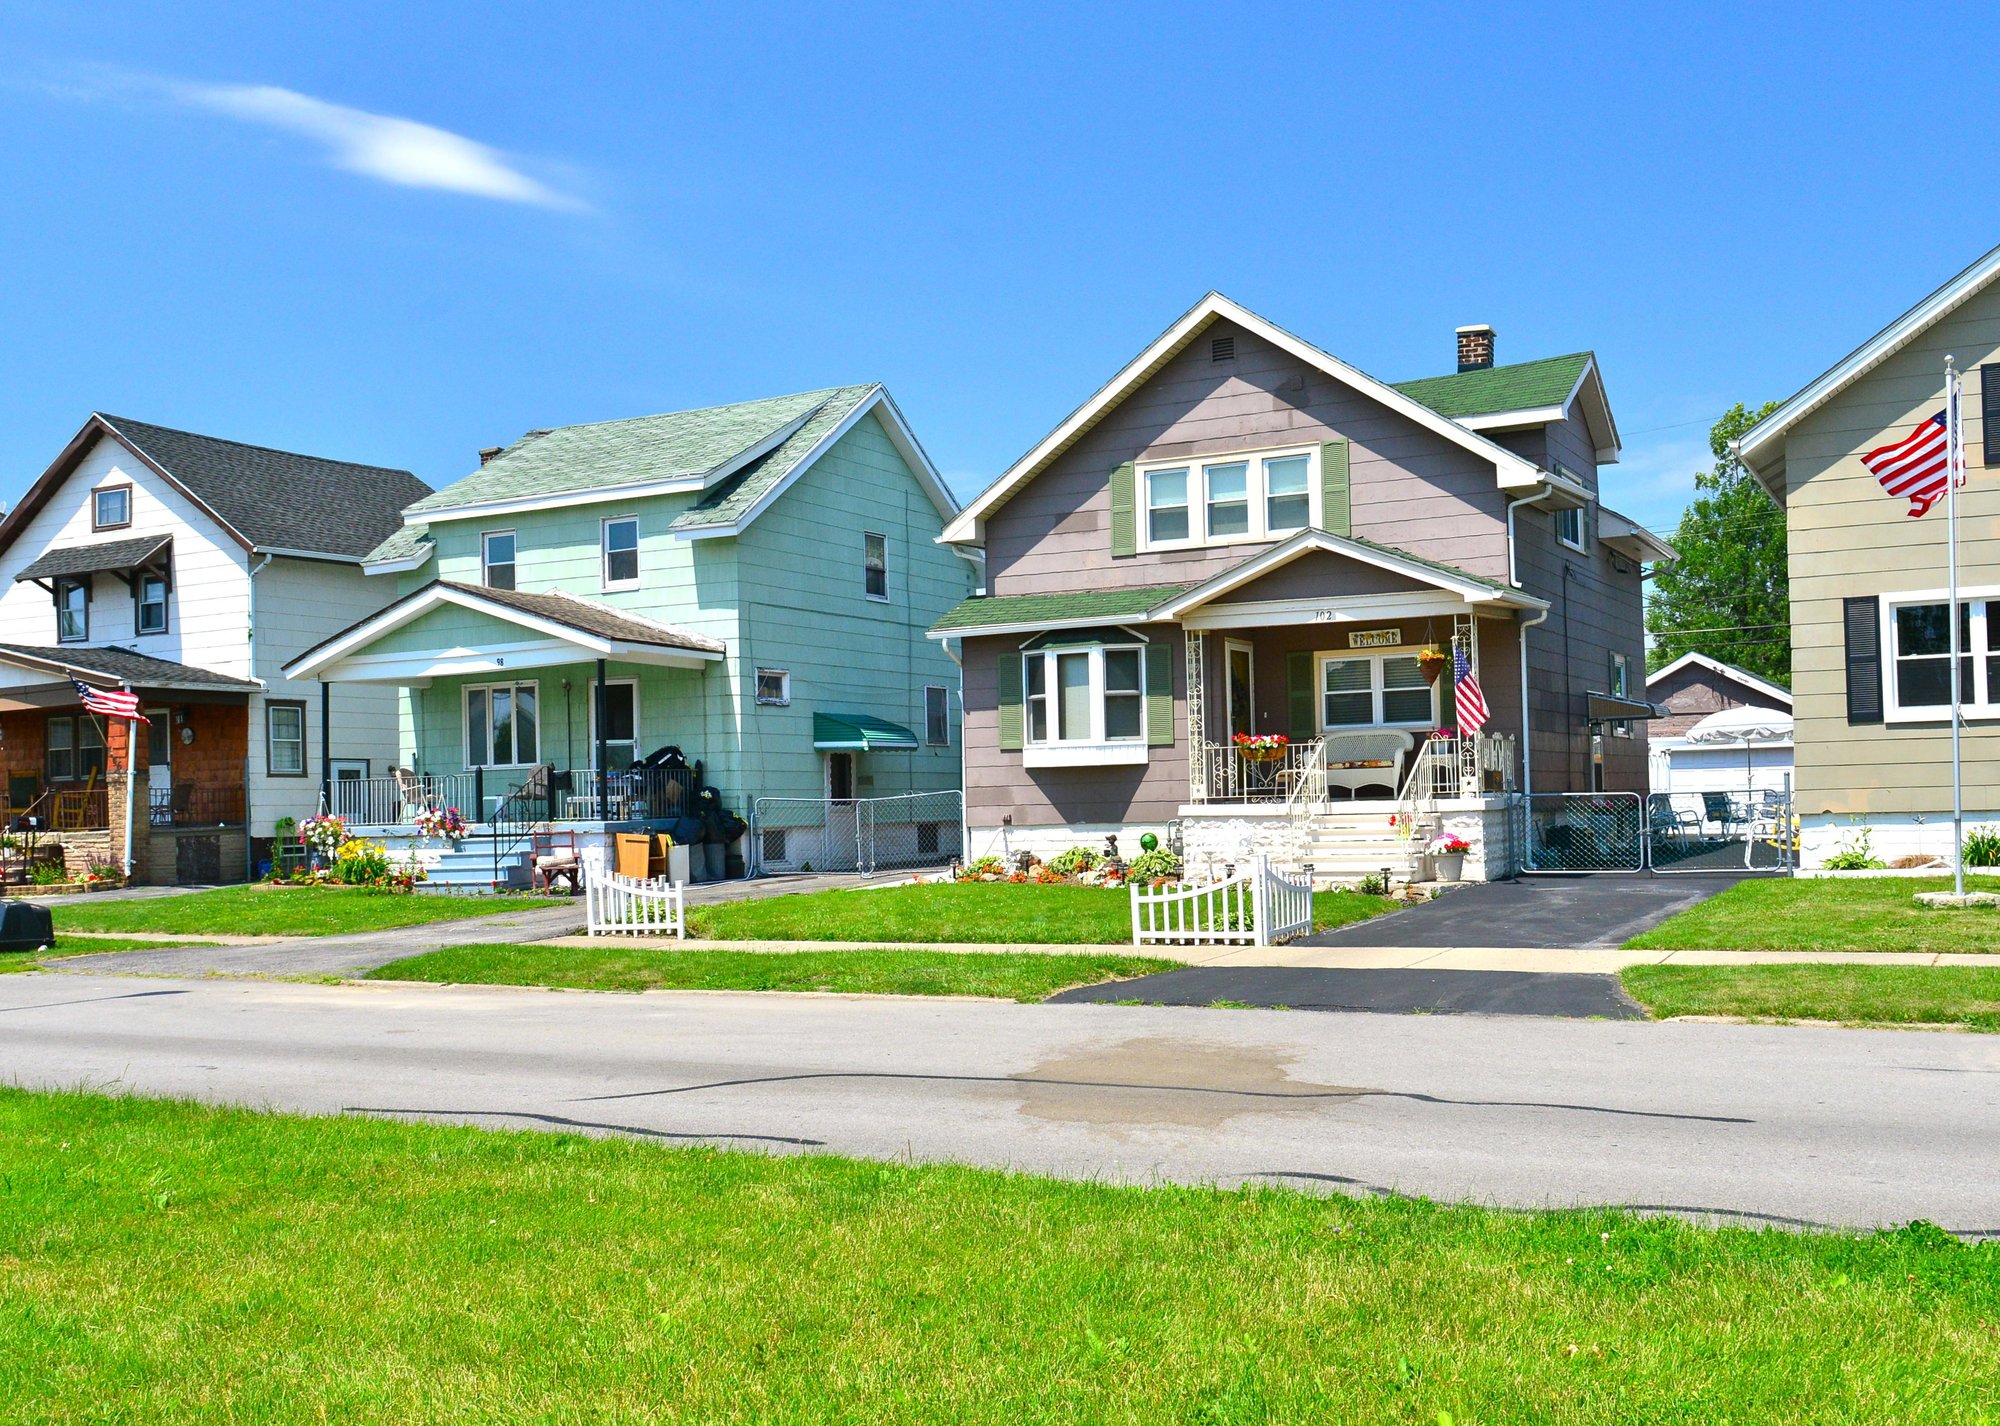 “Residential street with two story homes and lawns” - Source: Richard Cavalleri // Shutterstock